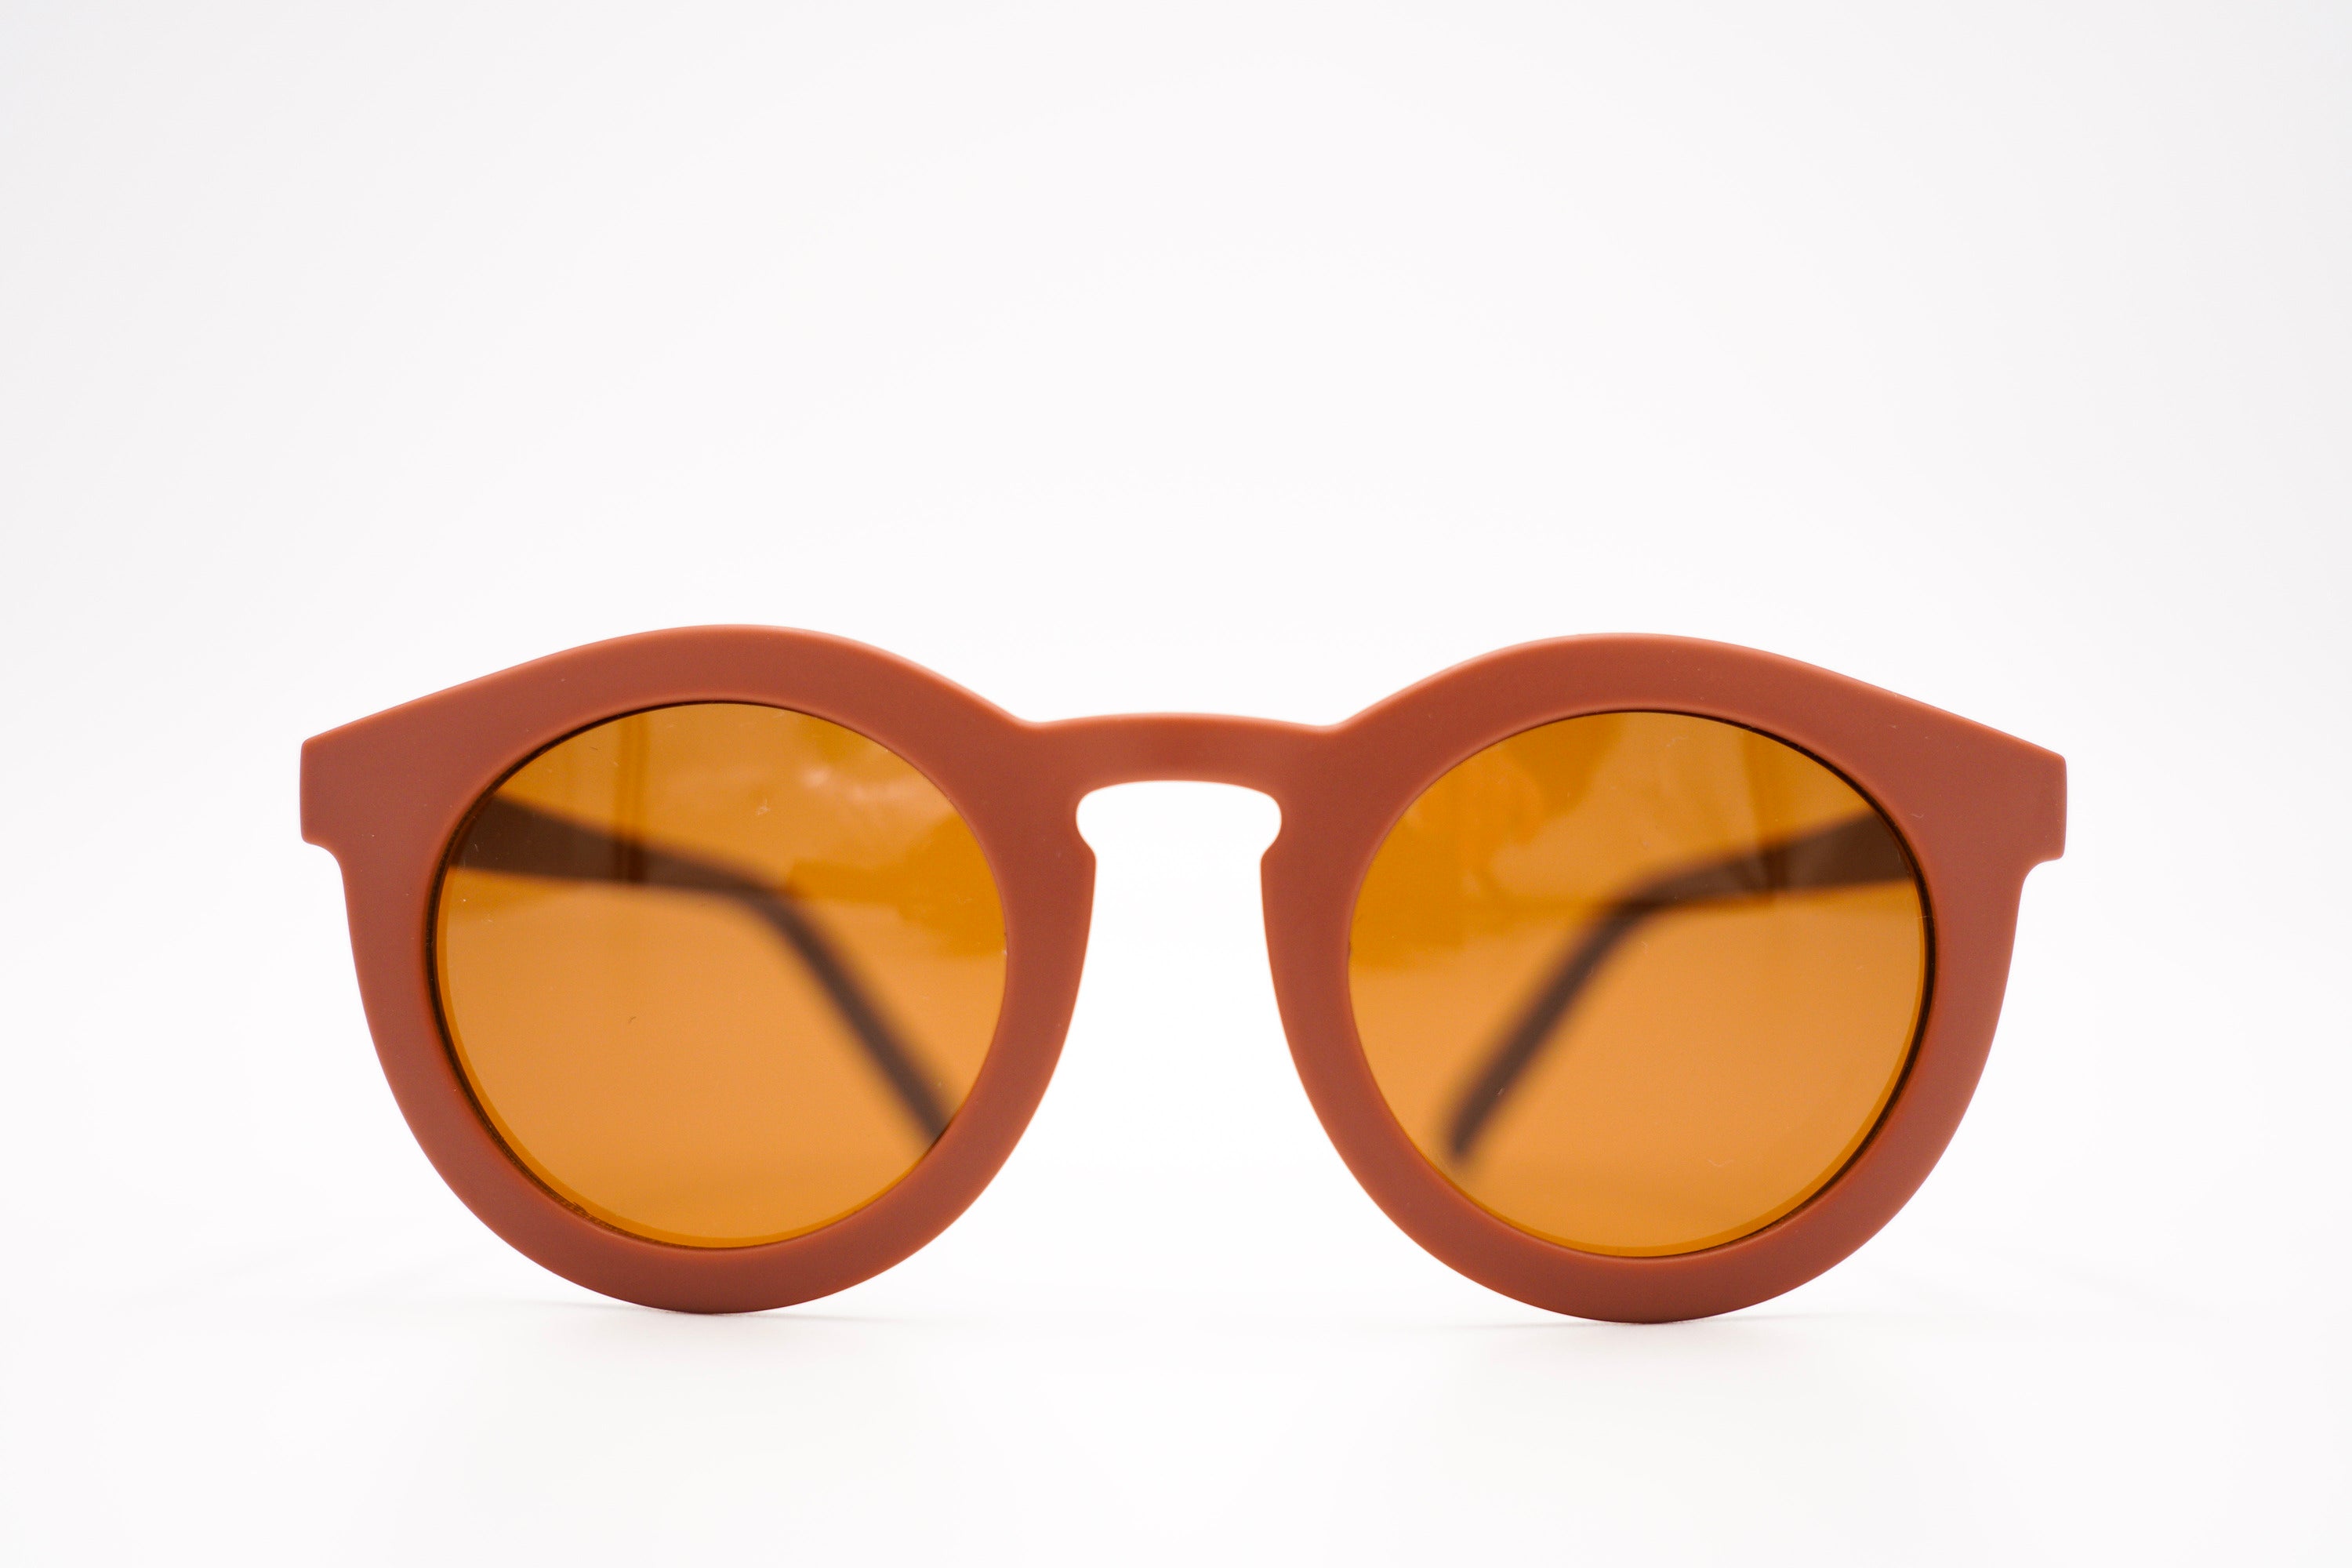 The new sustainable kid's sunglasses by Grech & Co in mallow colour are eco-friendly/non-toxic break-resistant material. Sustainable kids sunglasses from Grech & Co are the conscious choice for kids’ sunglasses with polarised lenses and with UV400 protection from the sun. MiliMilu offers baby and kids sunglasses.. 